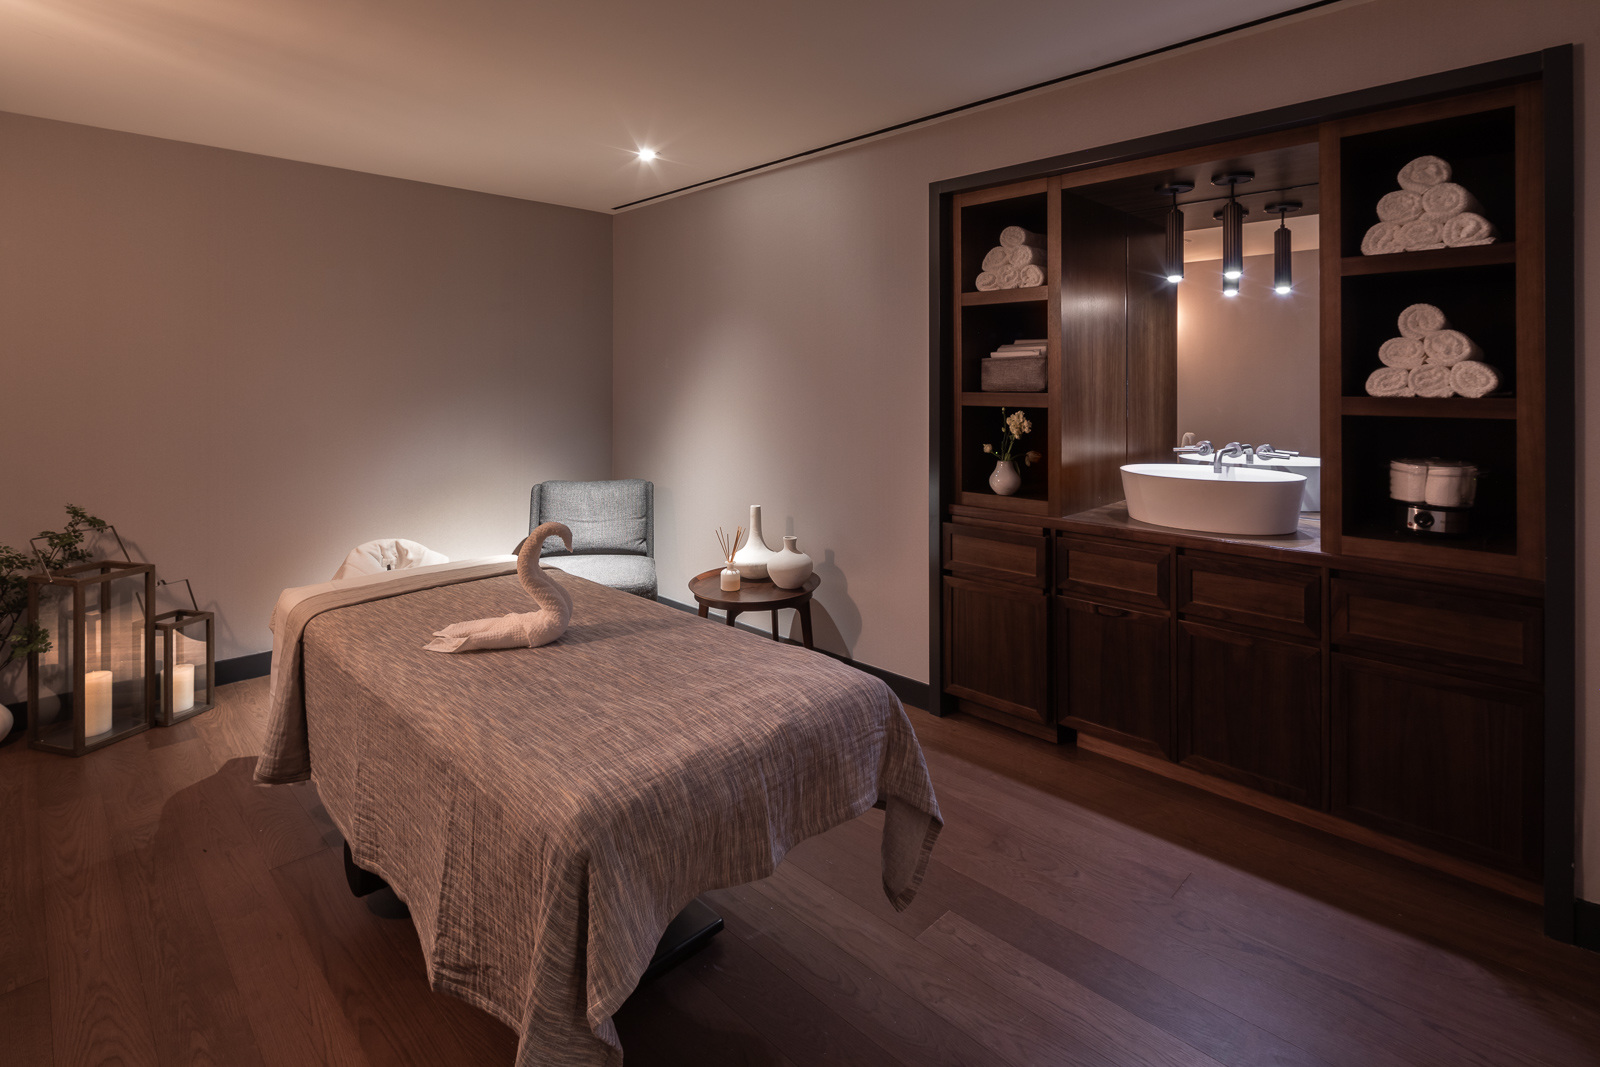 A serene and elegantly decorated massage room with a neatly made treatment table, soft lighting, and a wooden cabinet showcasing neatly folded towels and decorative items.